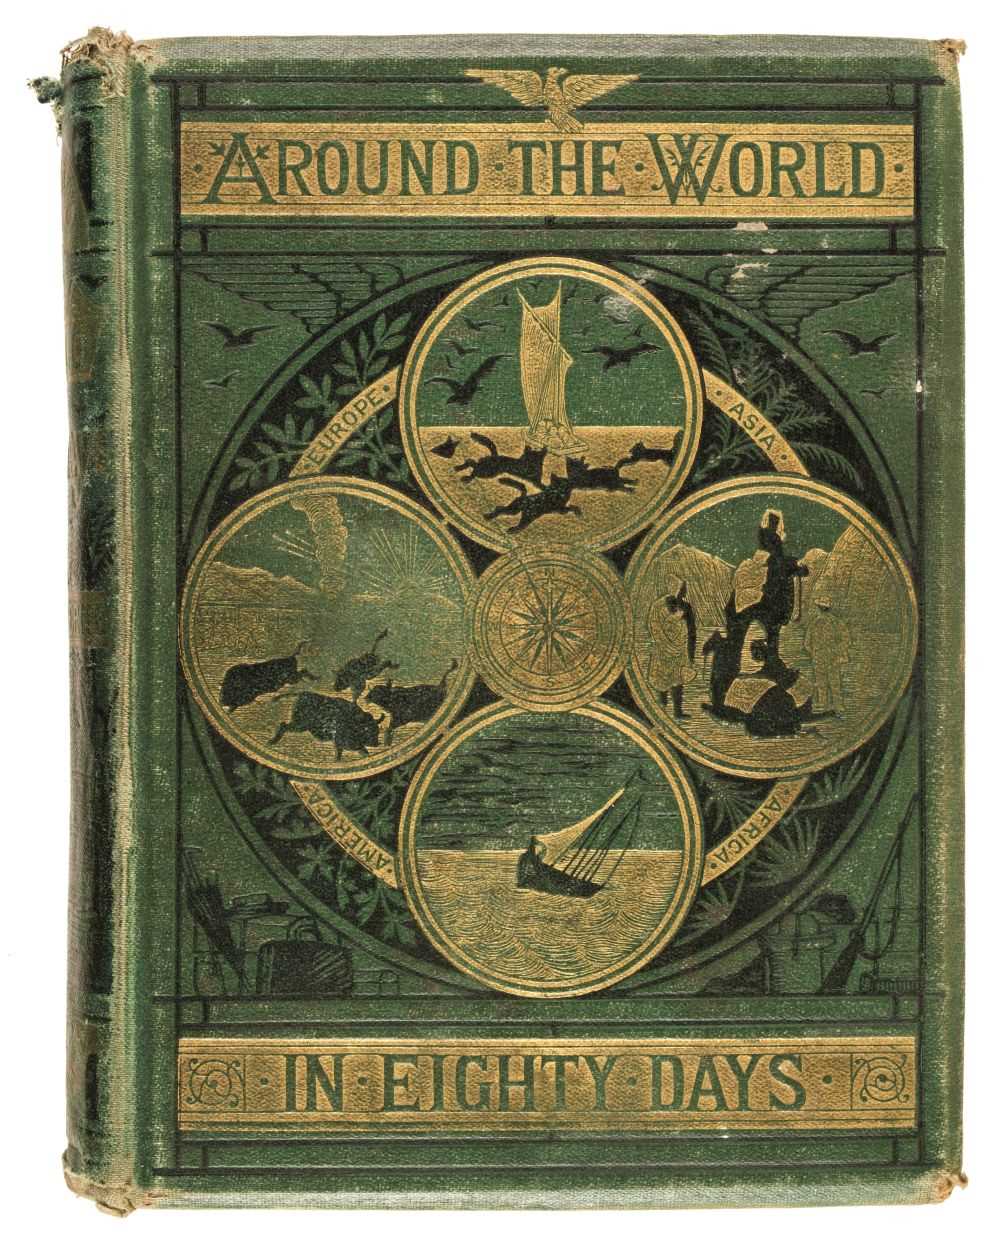 Lot 550 - Verne (Jules). Around the World in Eighty Days, 1st US illustrated edition, 1873